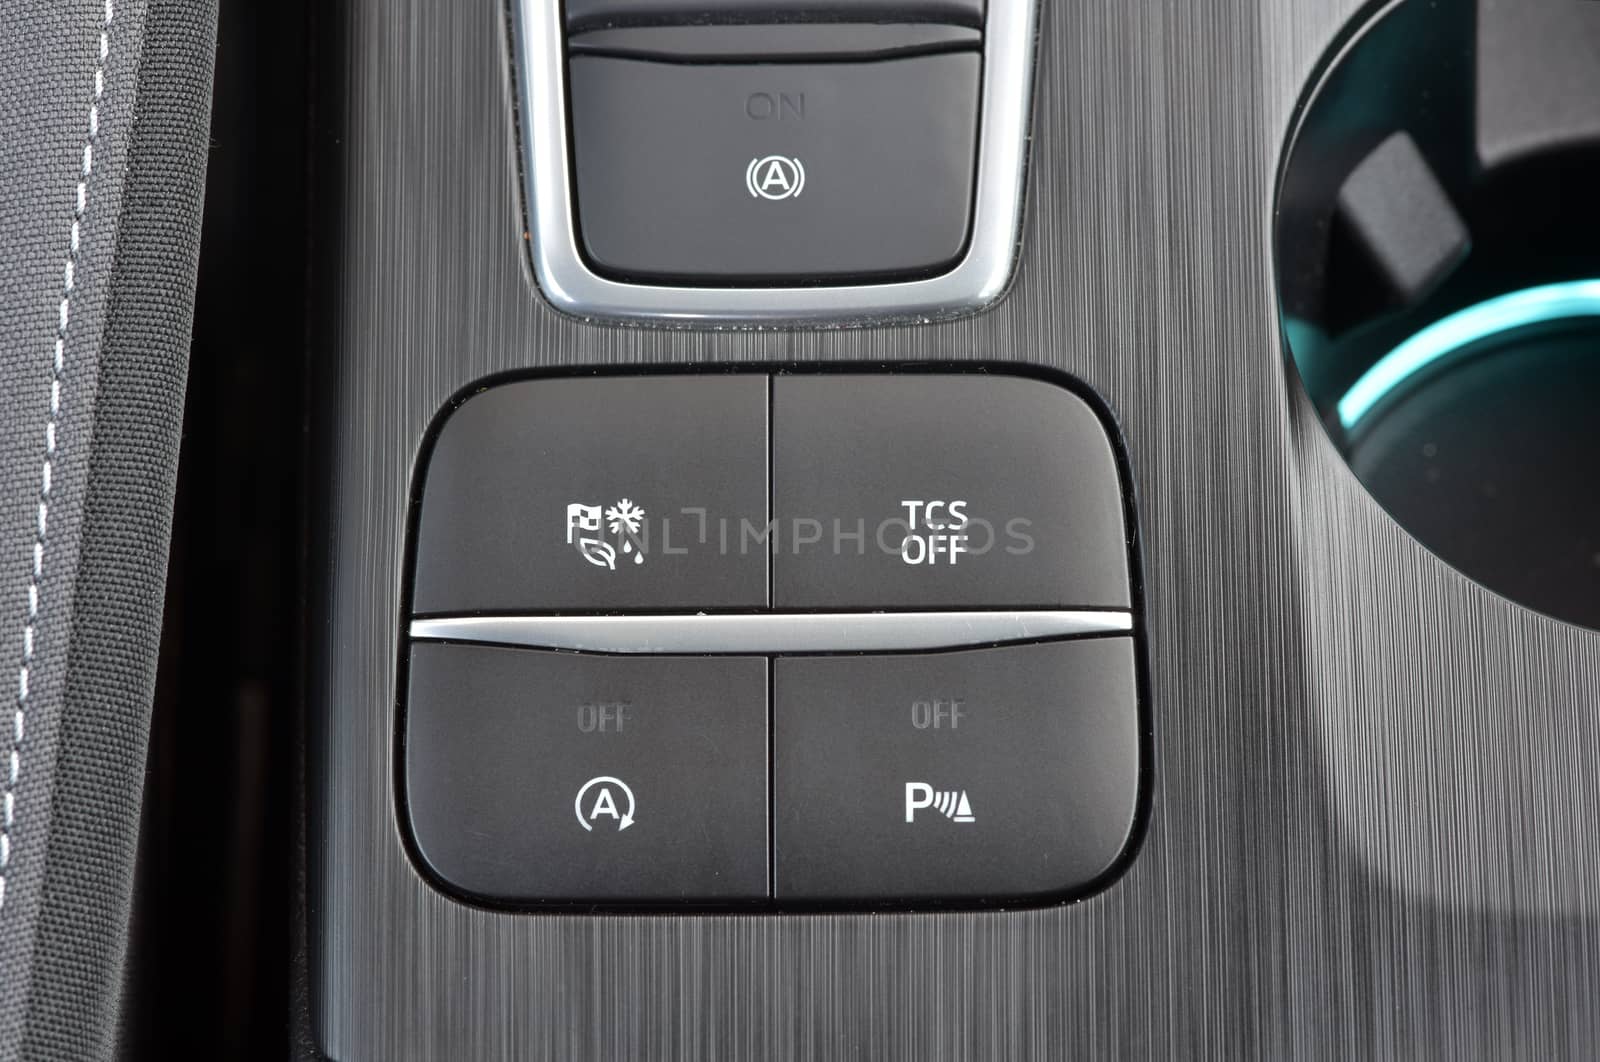 panel with buttons on the control panel of car